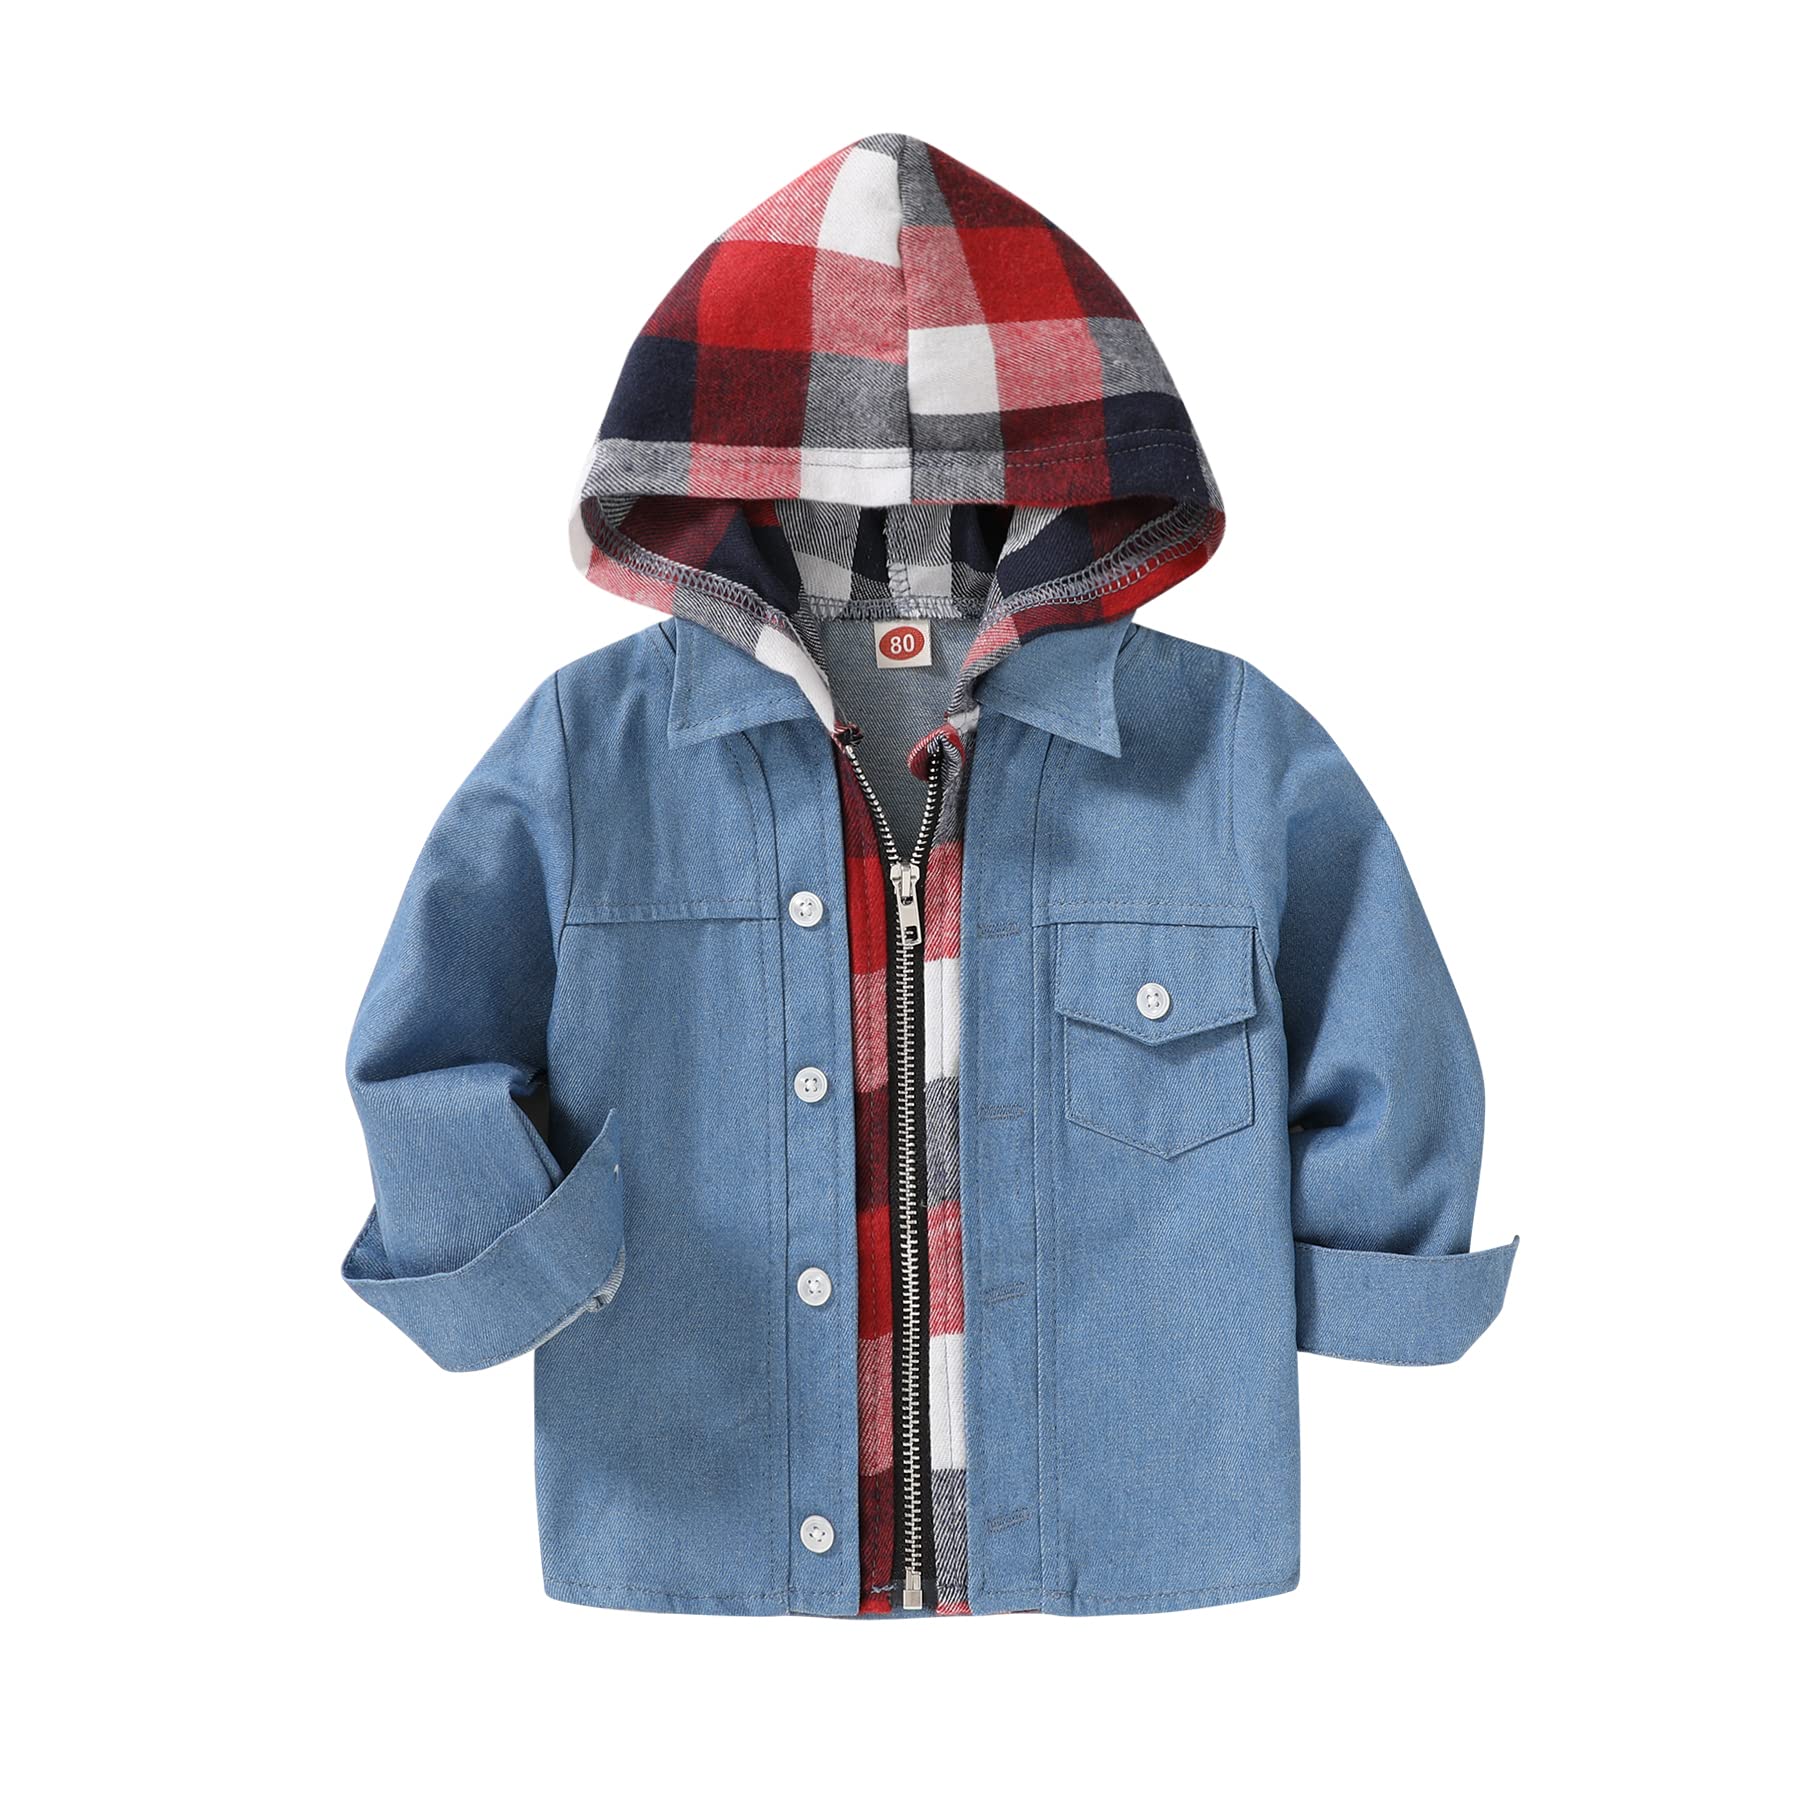 Younger Star Toddler Kidsbaby Boys Hooded Plaid Shirt Classical Shirt Hooded Jacket Fall Winter Clothes (Denim Blue, 3-6 Months)